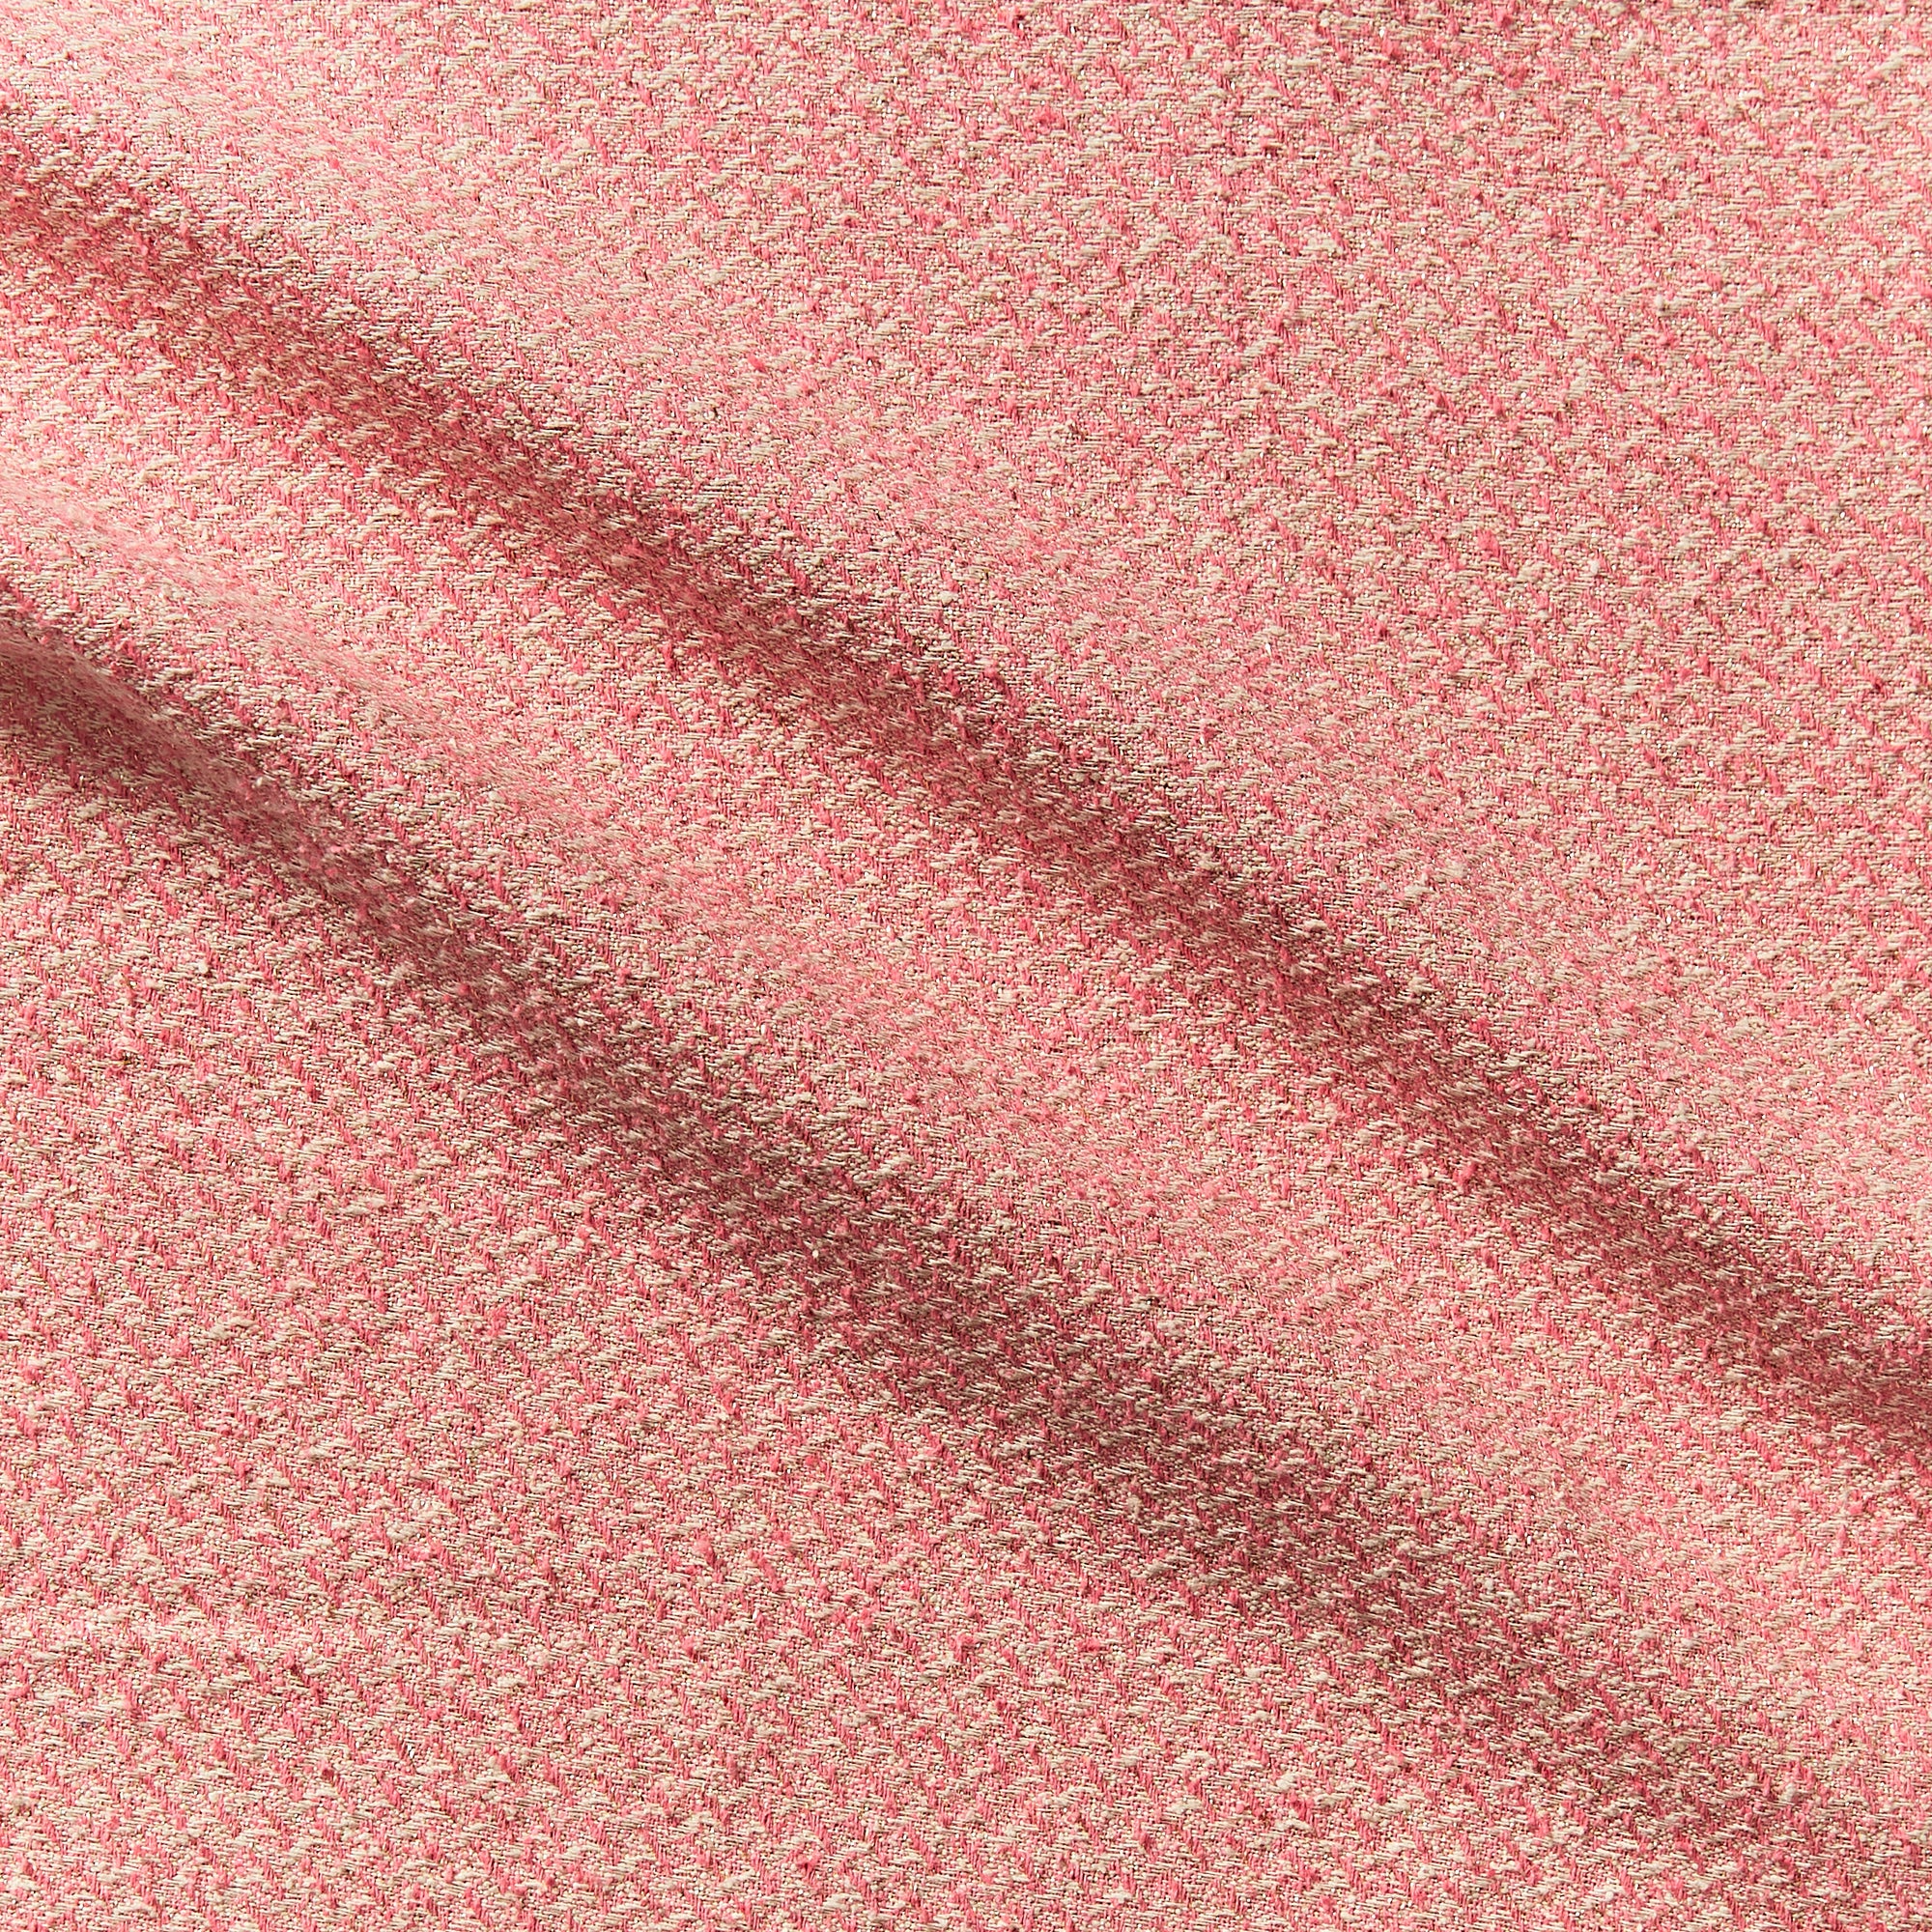 phoenix displaying the coral color version of a textured tweed look yard dyed heavy weight pure silk with lurex highlights 